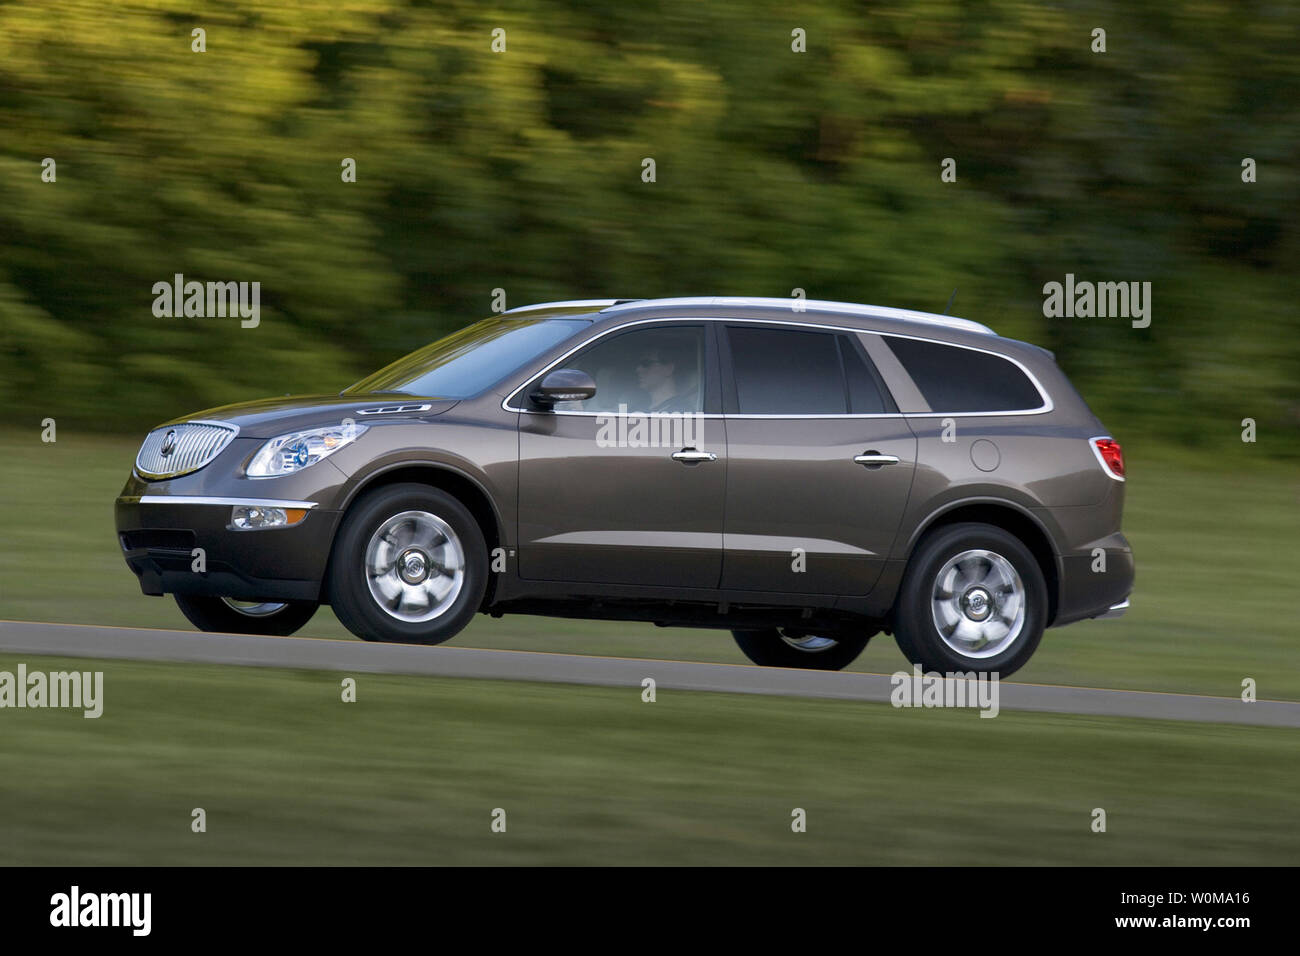 General Motors Released This Picture Of The 2008 Buick